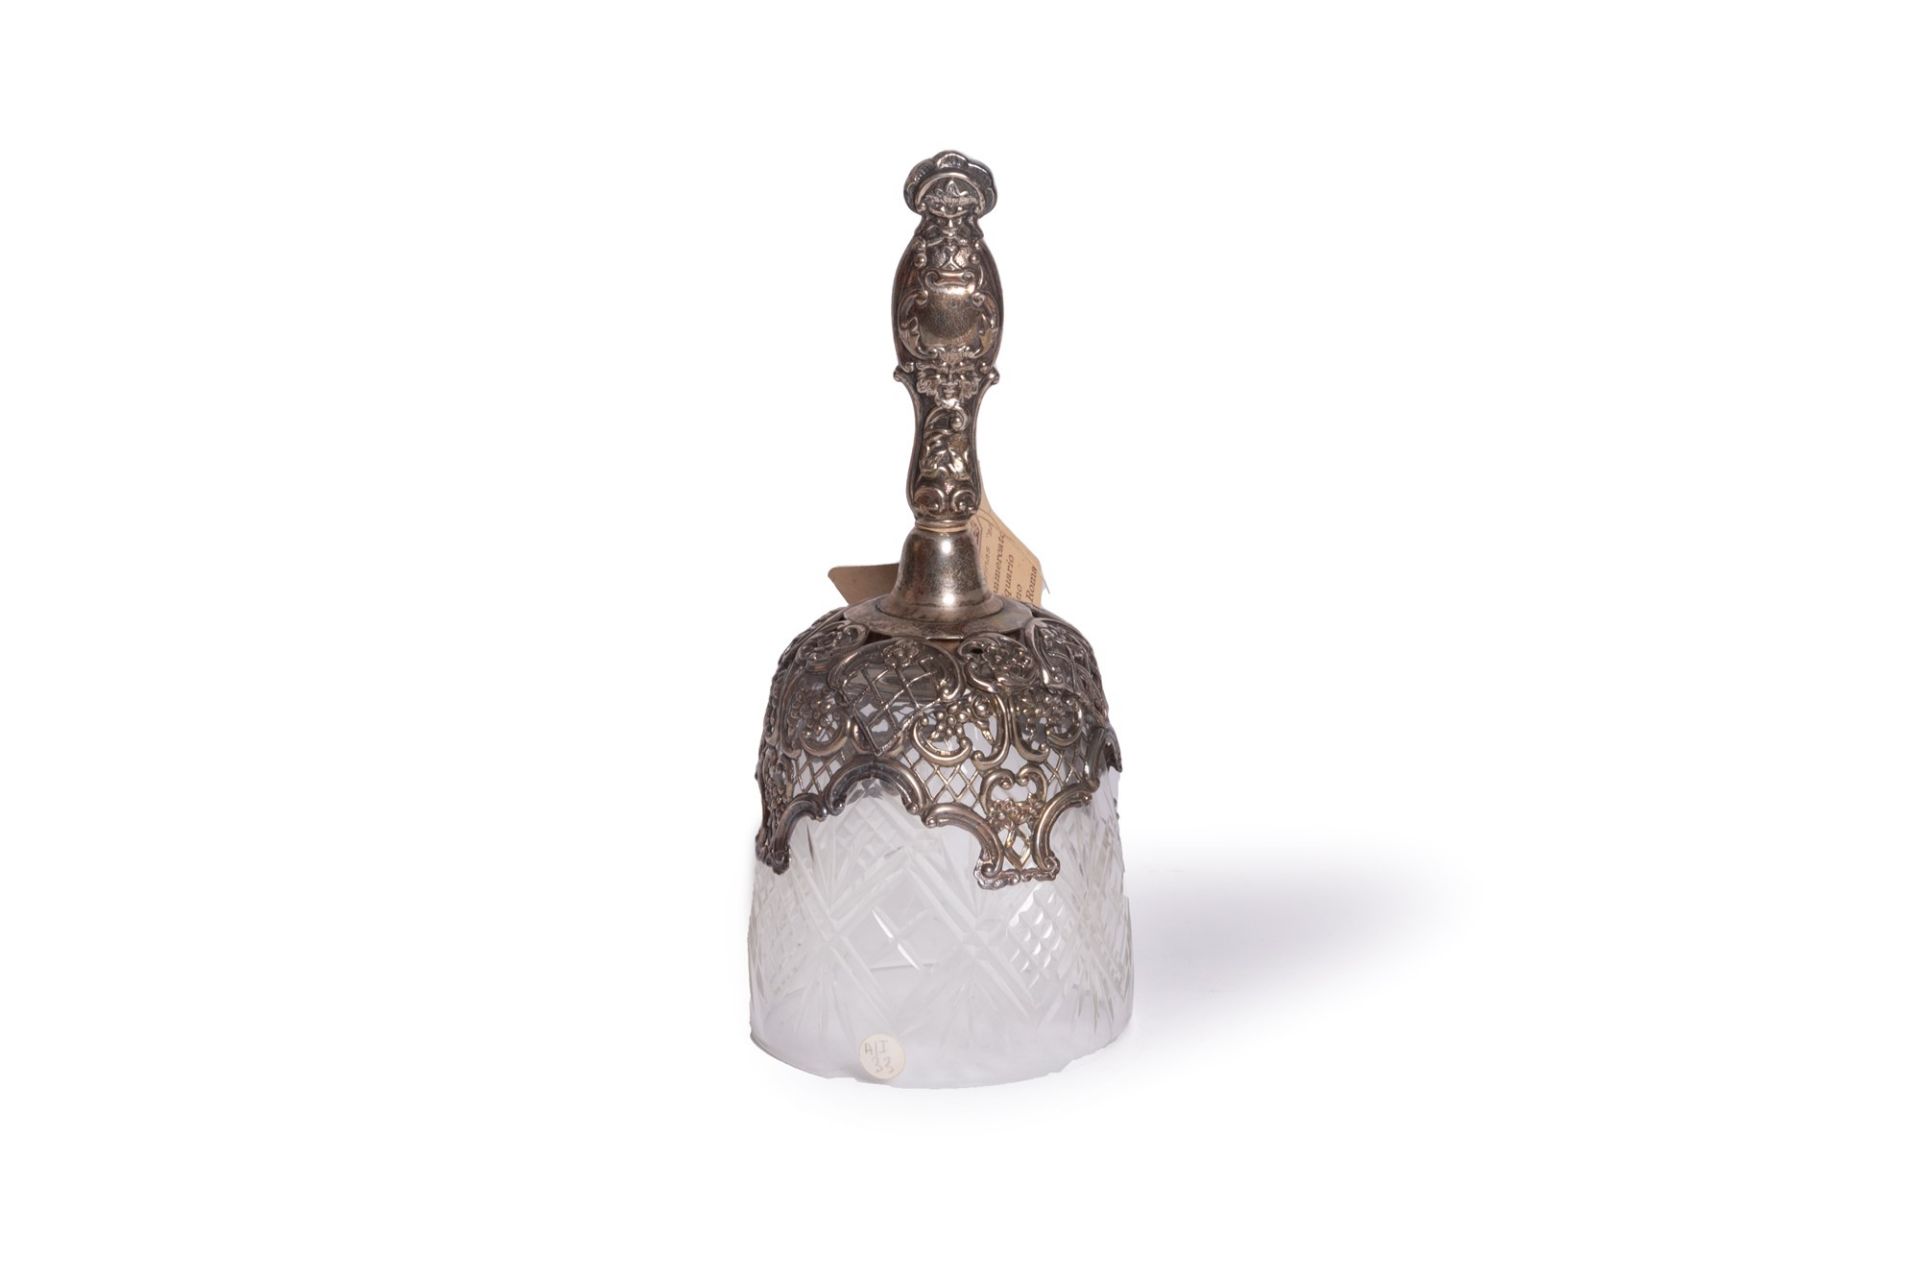 Silver and crystal bell, London, England, 19th century